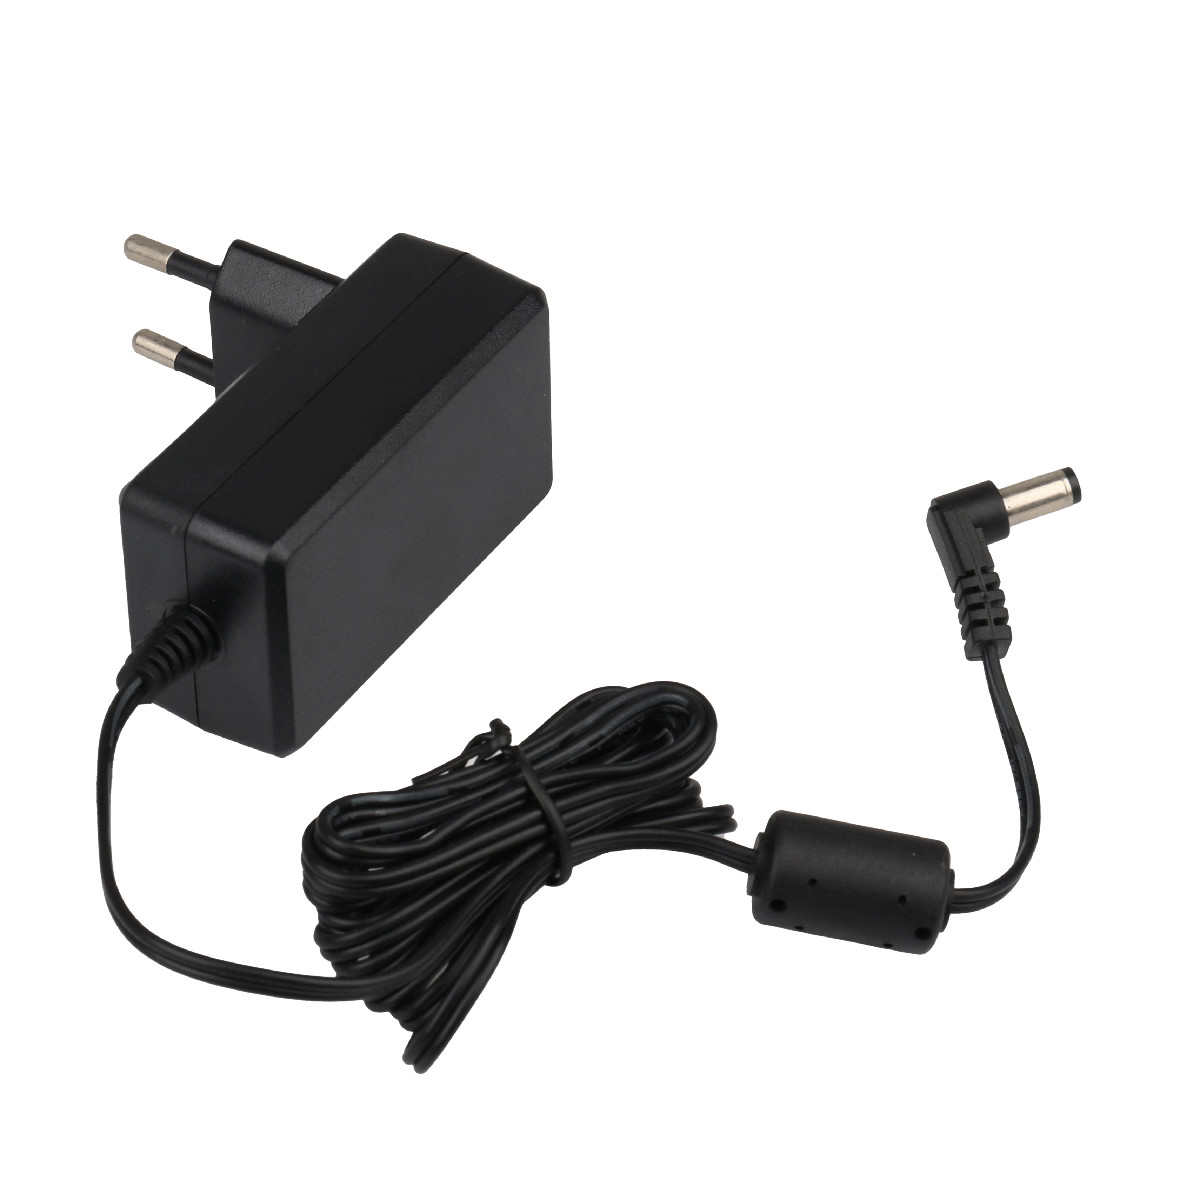 Buy cheap 48W 24V 2amp EU Plug AC DC Power Adapters For Air Purifier from wholesalers